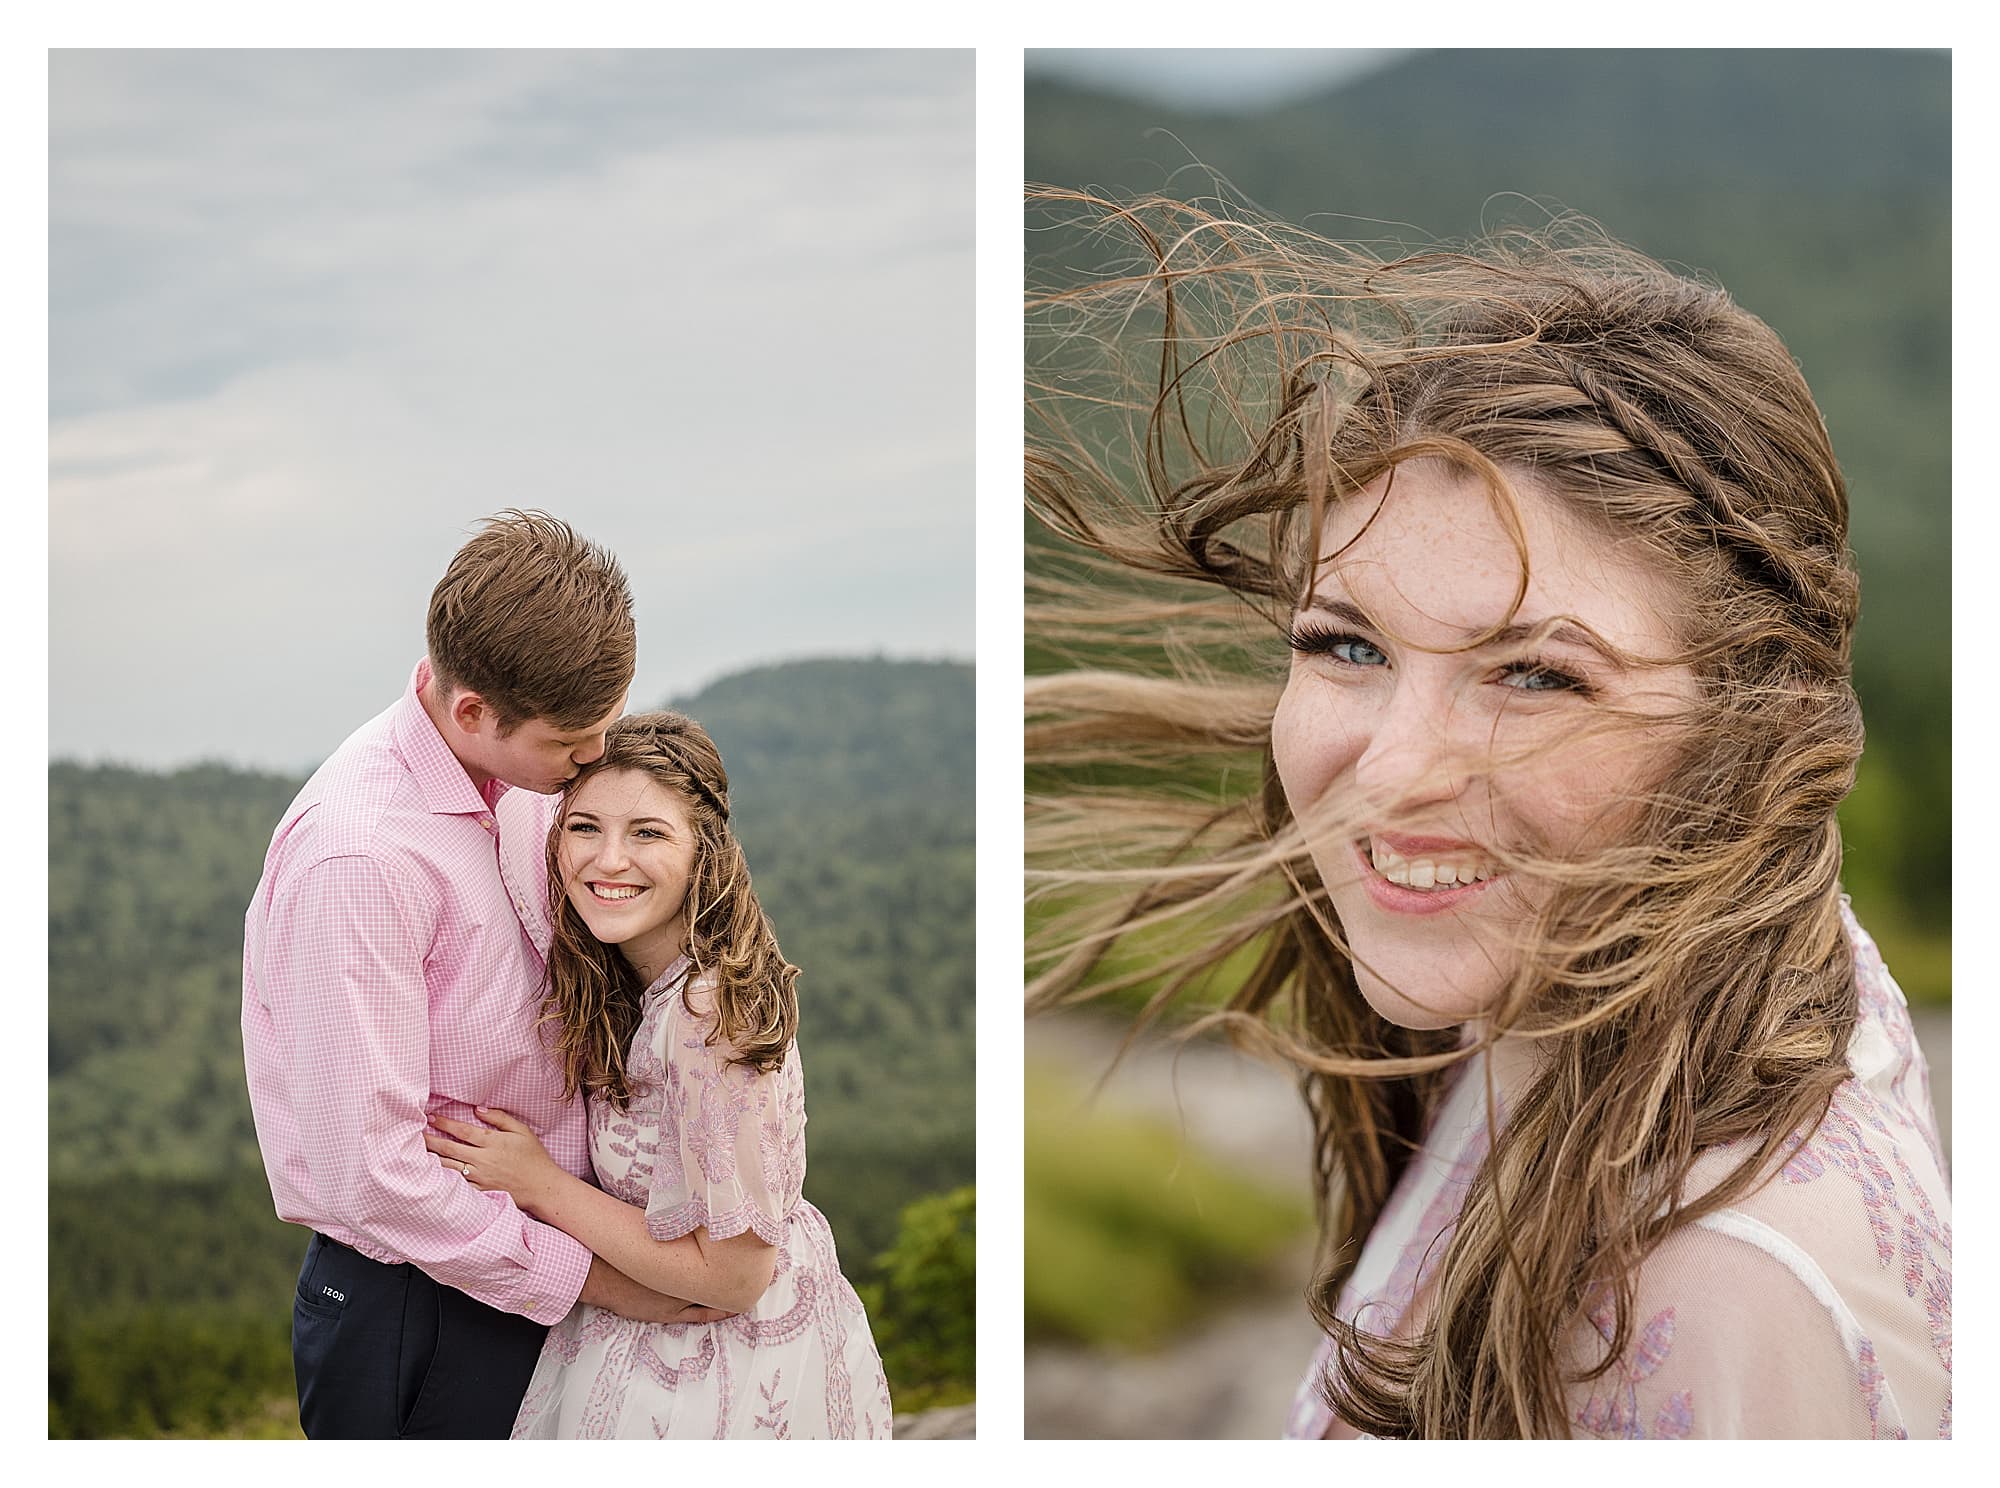 Photo of girl smiling and laughing while fiance hugs her on mountain top